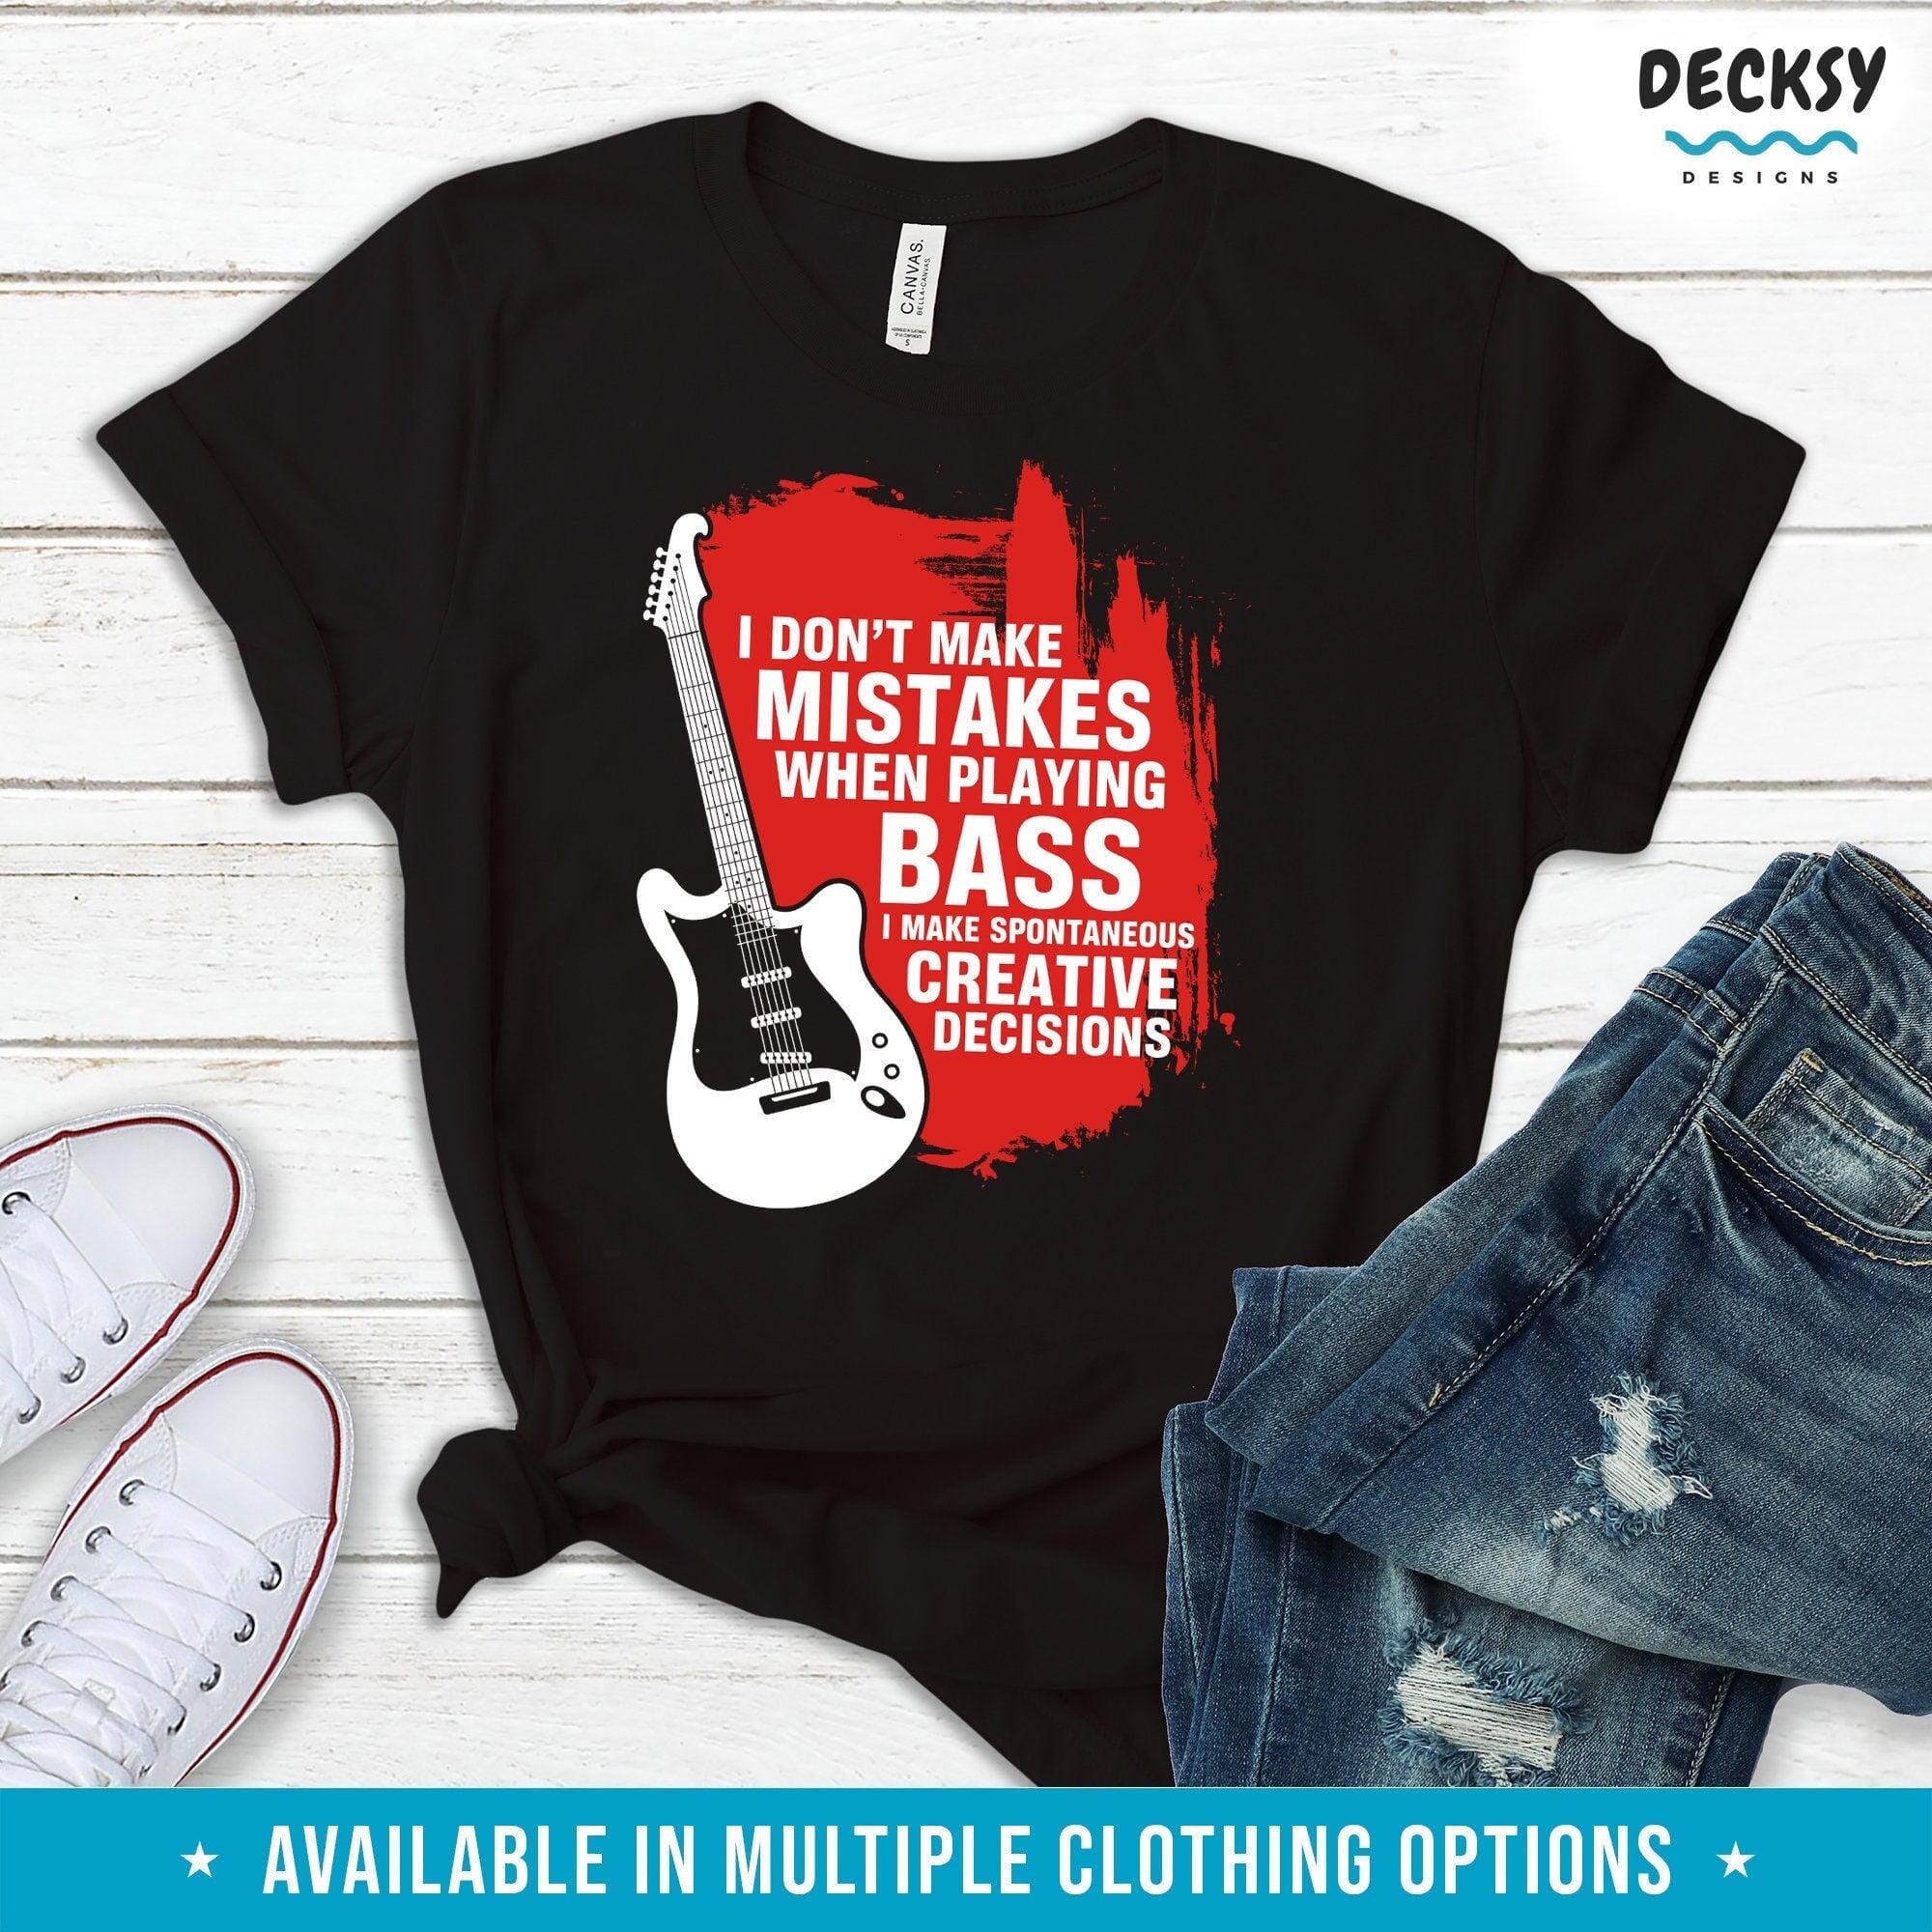 Bass Guitar Player Tshirt, Gift for Bassist-Clothing:Gender-Neutral Adult Clothing:Tops & Tees:T-shirts:Graphic Tees-DecksyDesigns